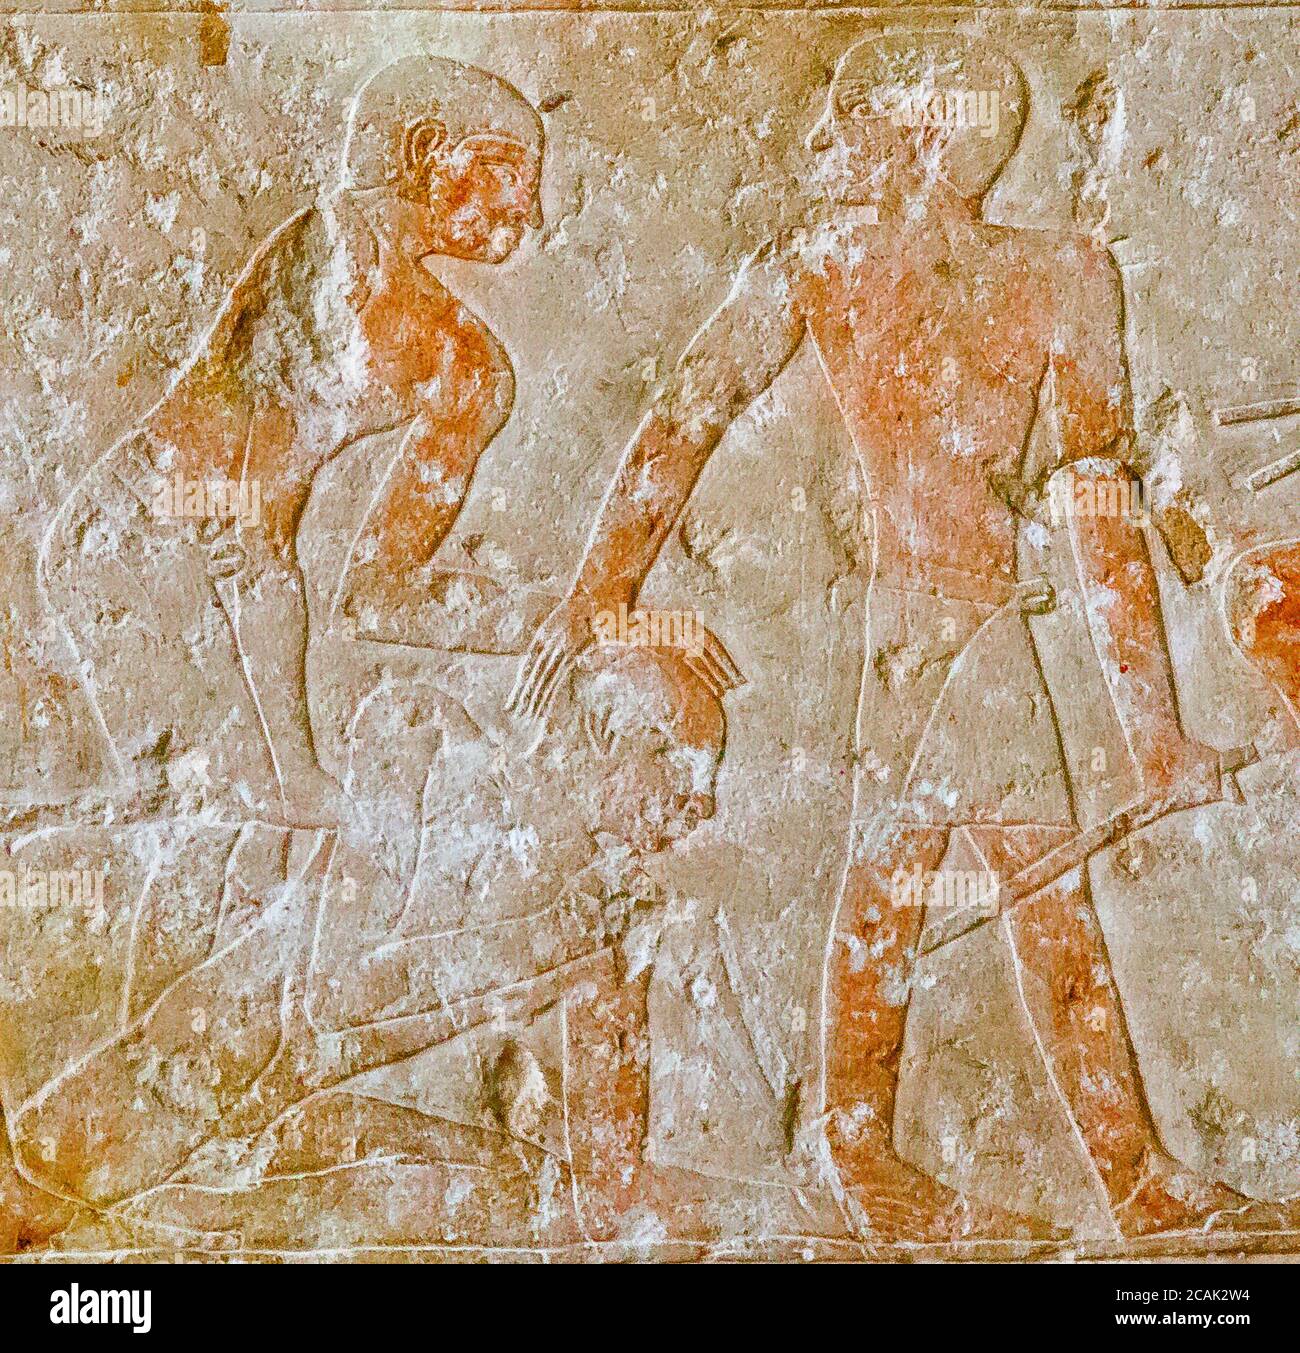 Cairo, Egyptian Museum, tomb of Kaemrehu, Saqqara, detail of a relief depicting agricultural scenes : A man is presented to scribes and maybe beaten. Stock Photo